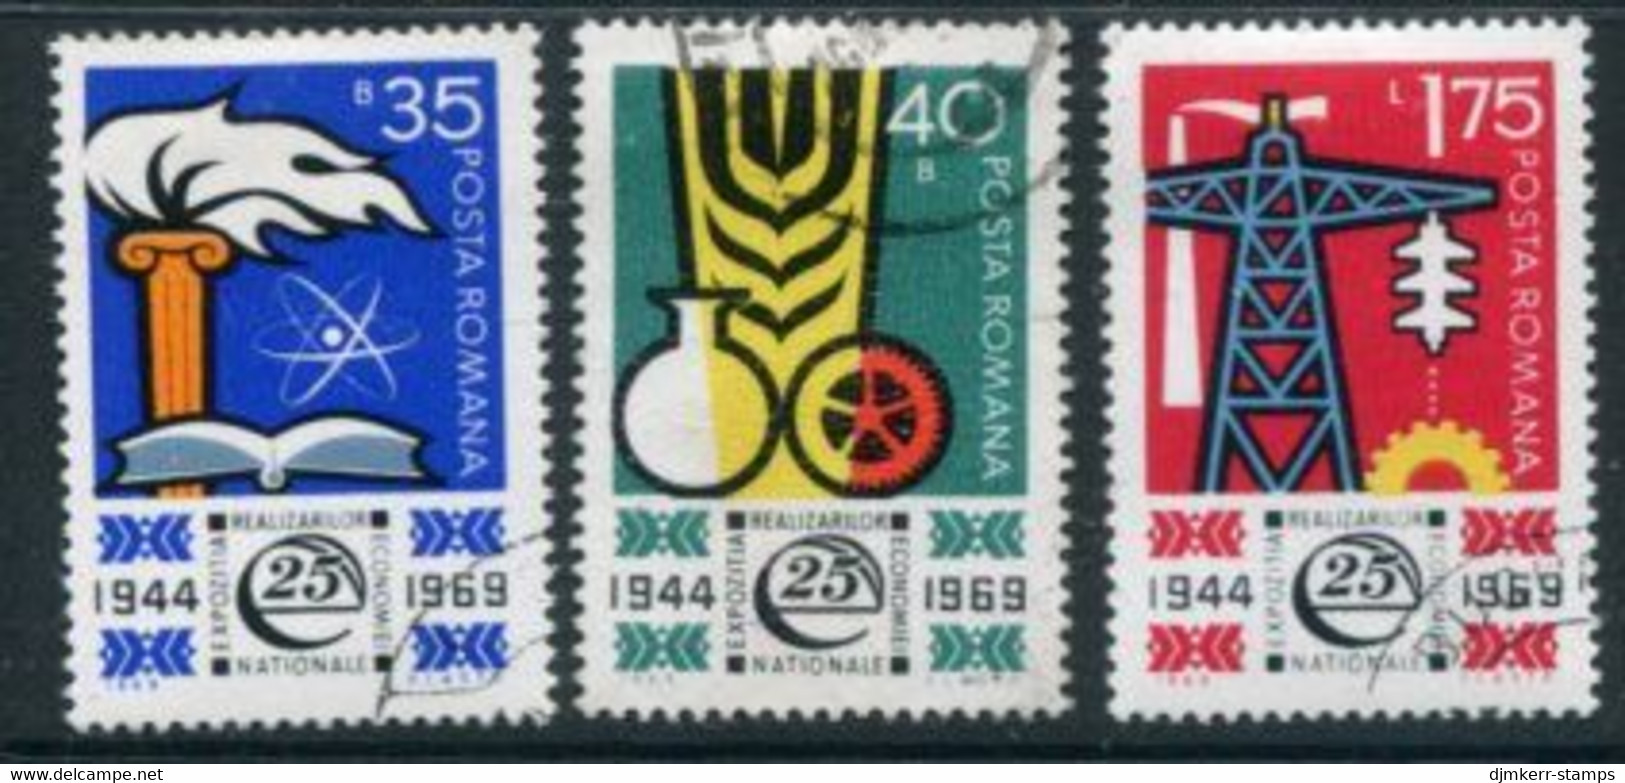 ROMANIA 1969 Industrial Development Used.  Michel 2783-85 - Used Stamps